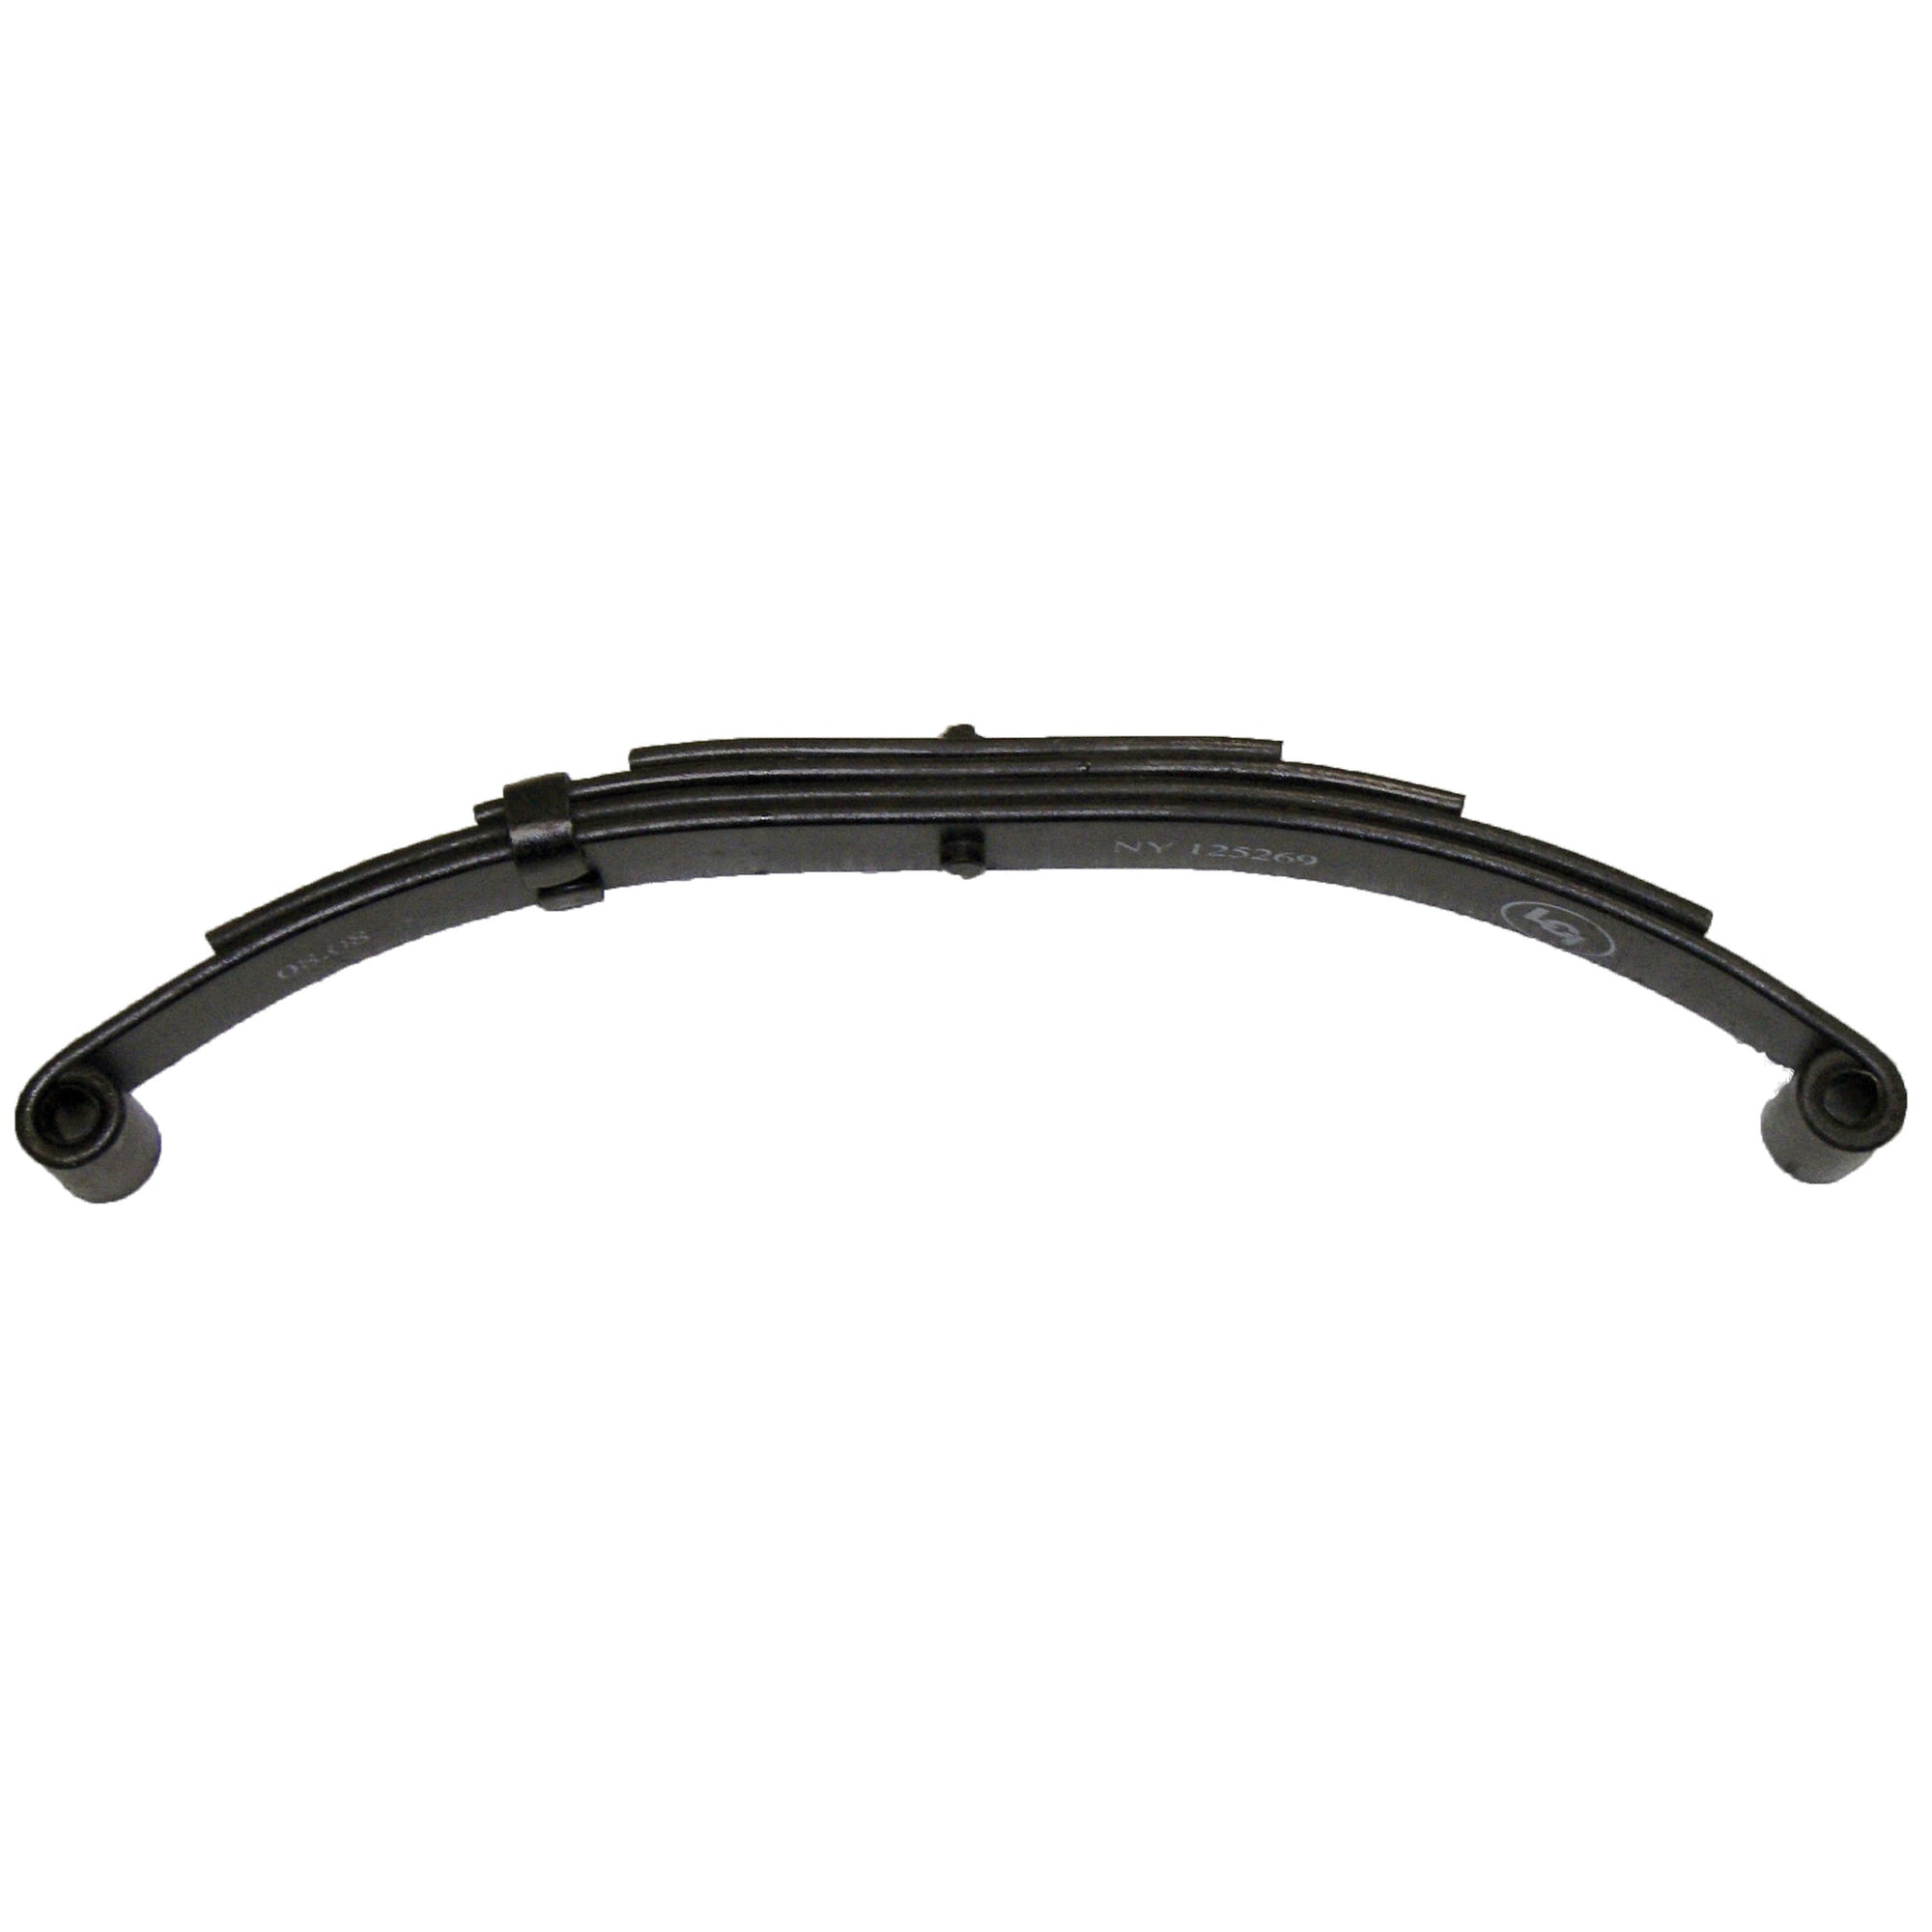 AP Products 014-125799 Axle Leaf Spring - 2000 lbs., 4 Leaves, 23-1/8"